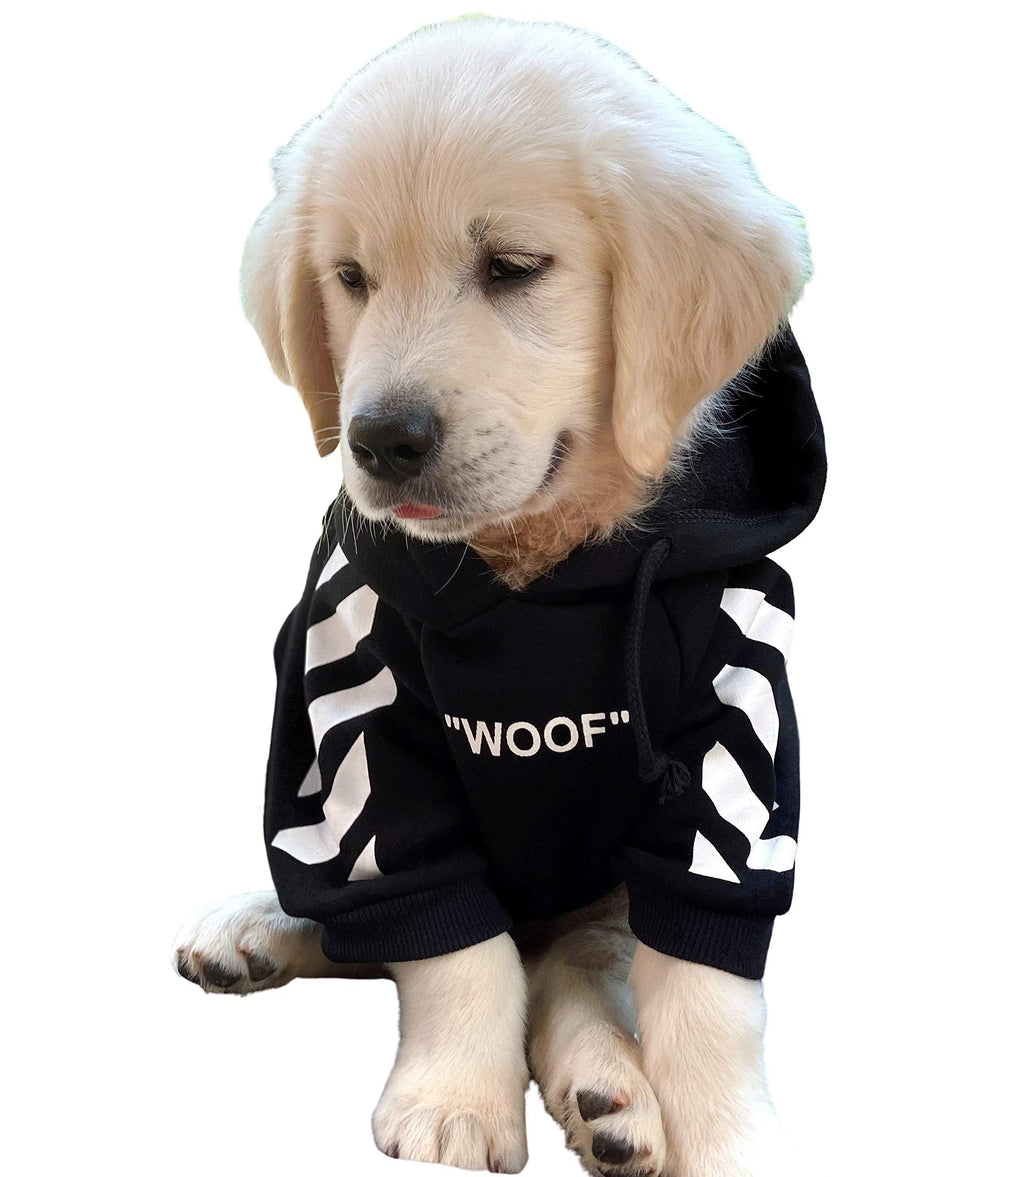 [Australia] - ChoChoCho Woof Dog Hoodie Pet Clothes Stylish Streetwear Cotton Sweatshirt Fashion Outfit for Dogs Cats Puppy Small Medium Large Black with White Stripe 